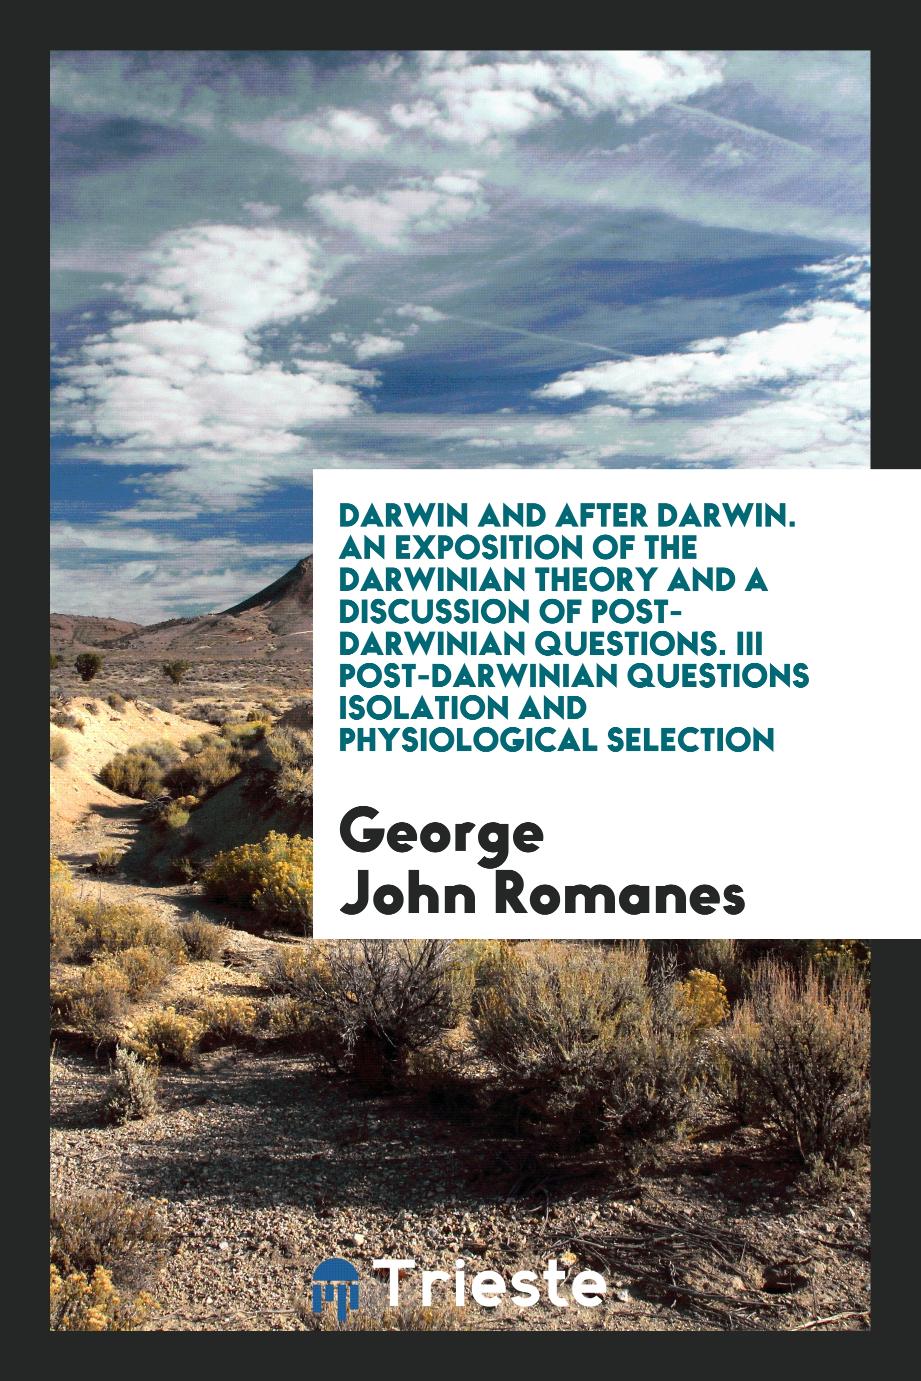 Darwin and after Darwin. An exposition of the Darwinian theory and a discussion of post-Darwinian questions. III post-darwinian questions isolation and physiological selection